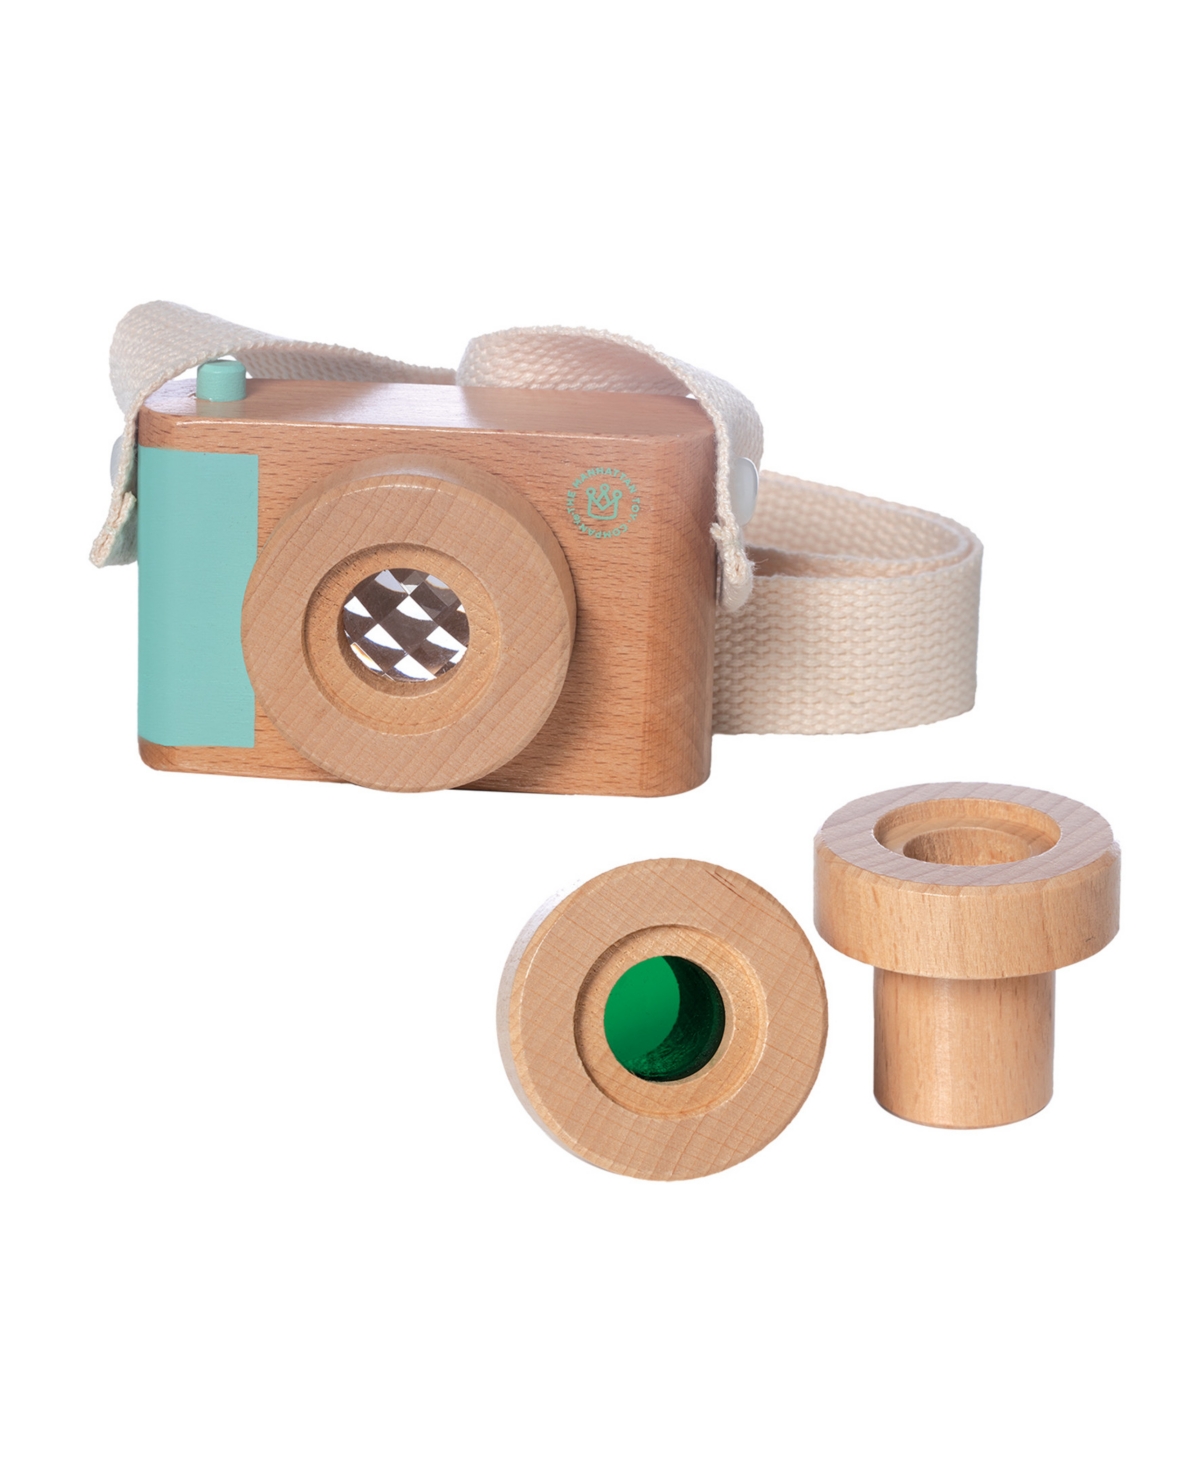 Manhattan Toy Company Kids' Natural Historian Wooden Camera Pretend Time Play And Kaleidoscope Lenses In Multicolor